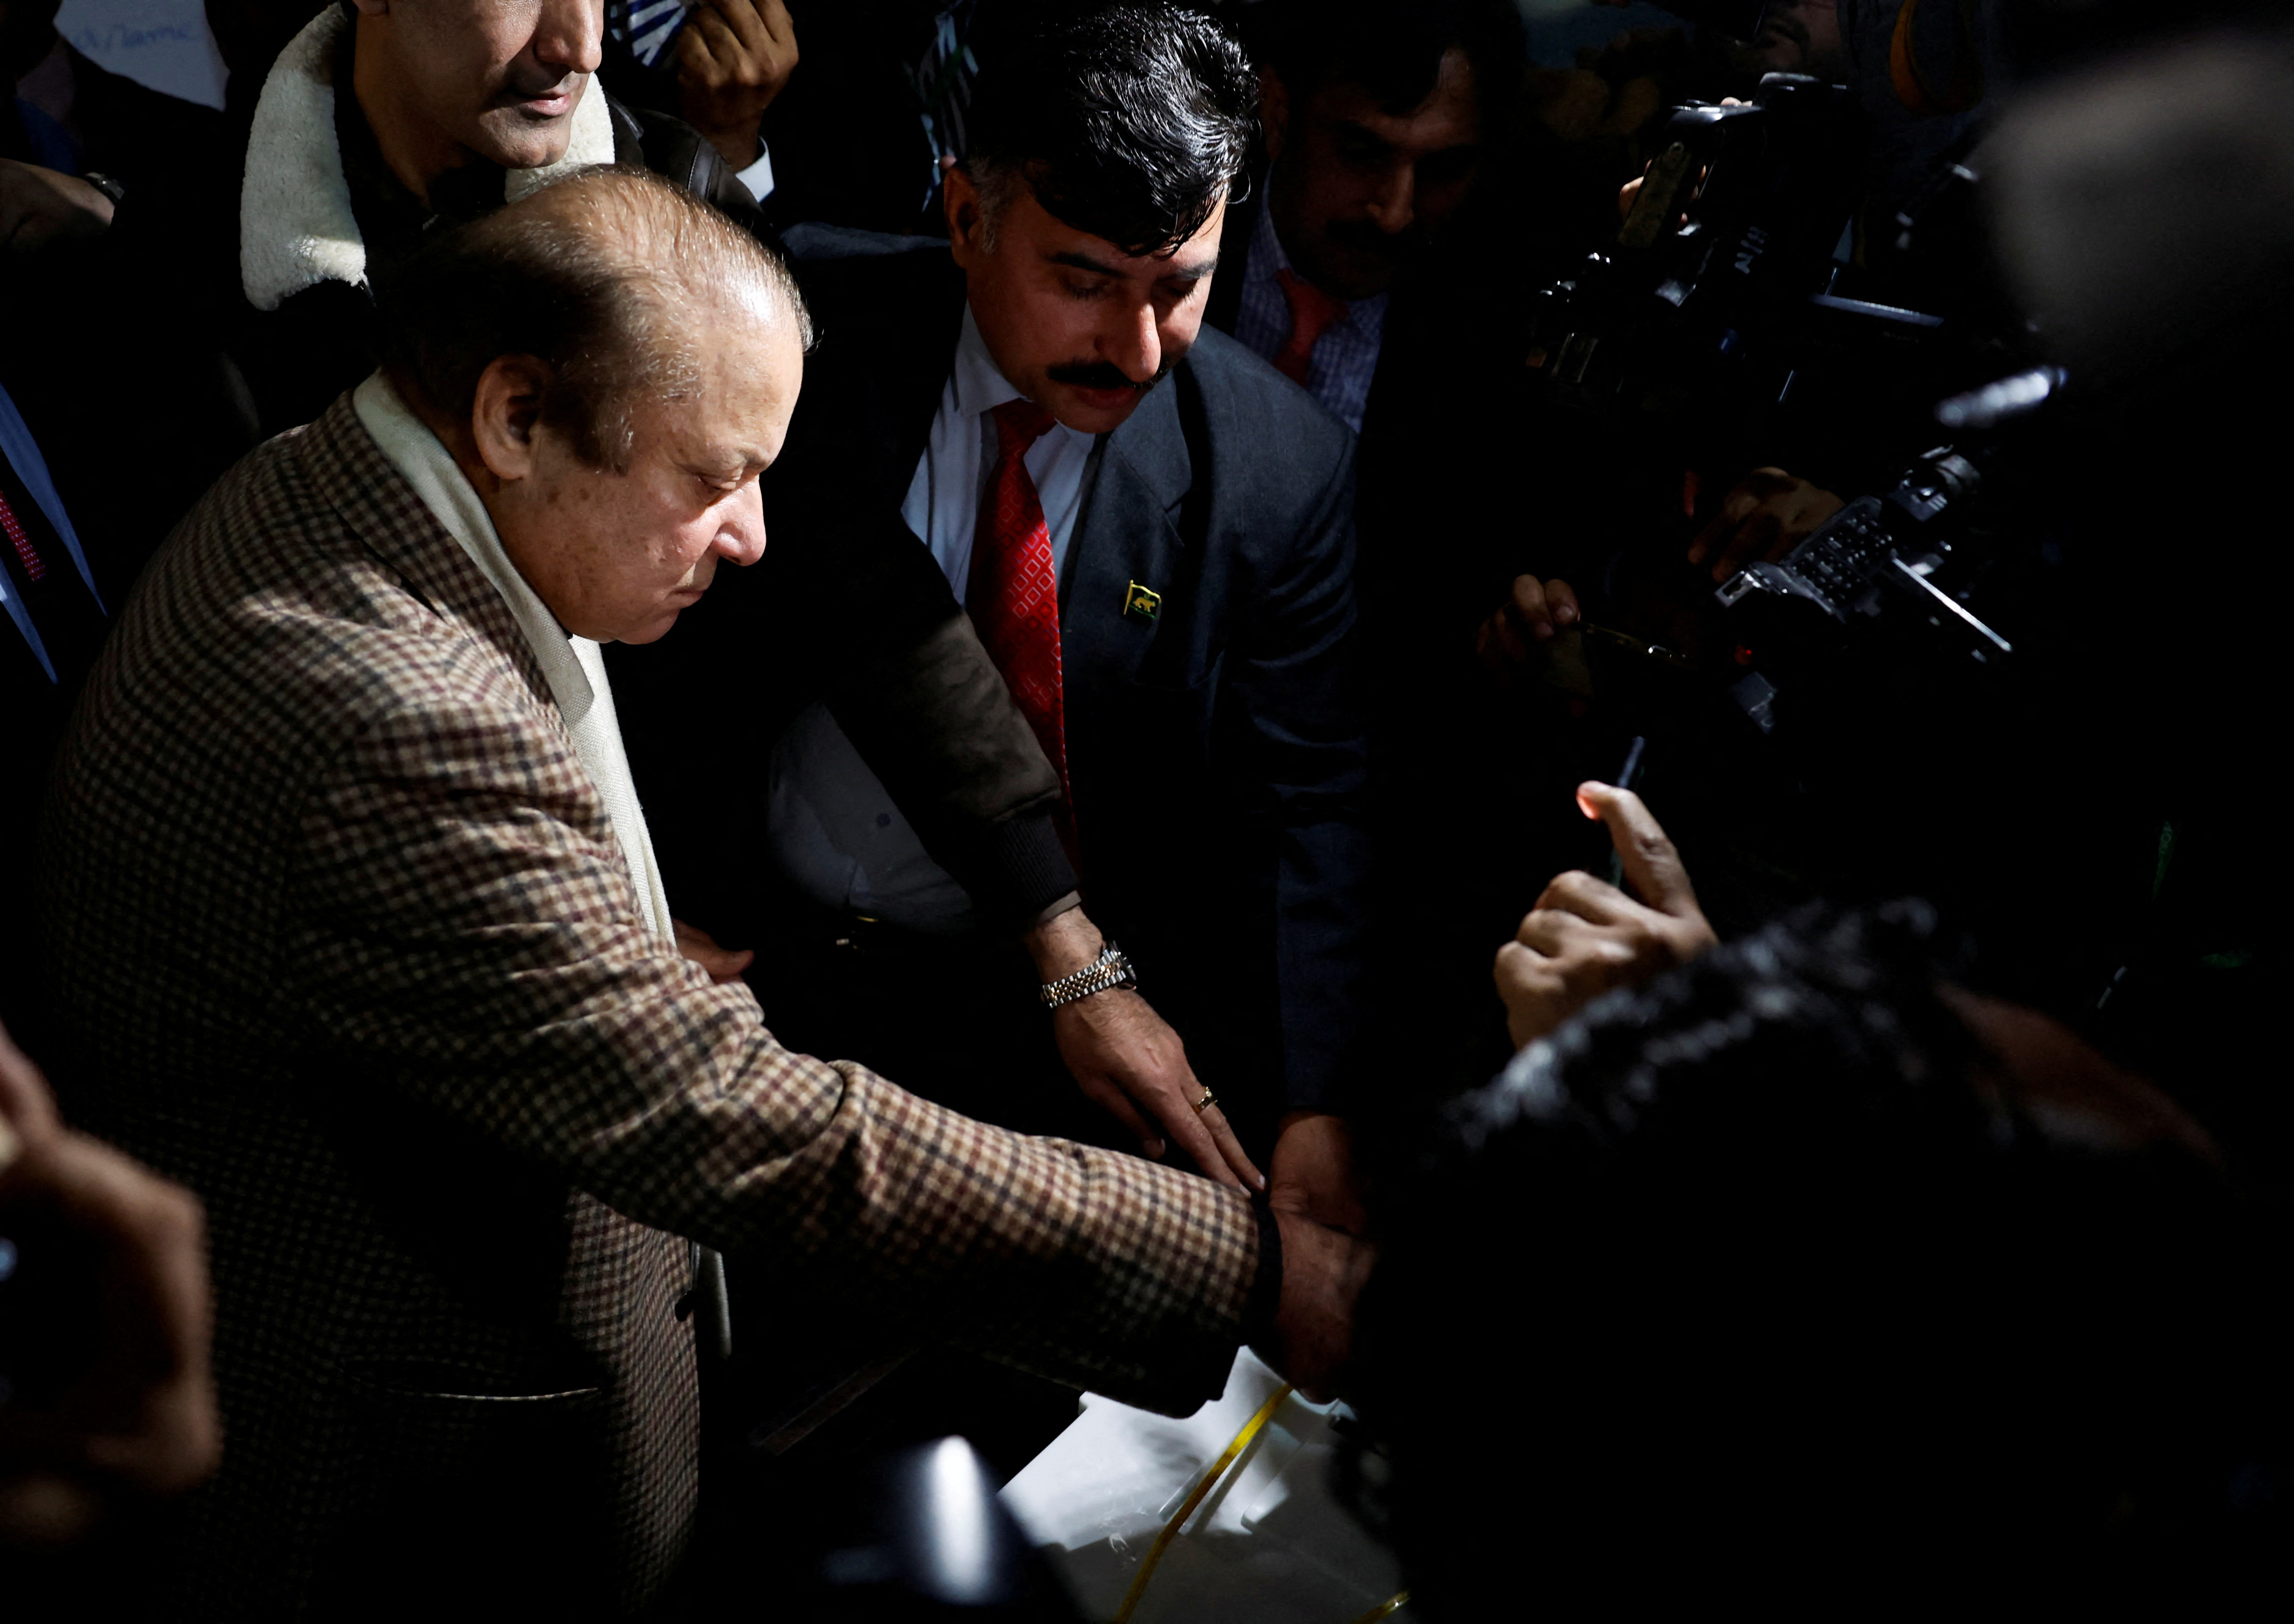 Former Prime Minister Nawaz Sharif casts his vote at a polling station during the general election, in Lahore